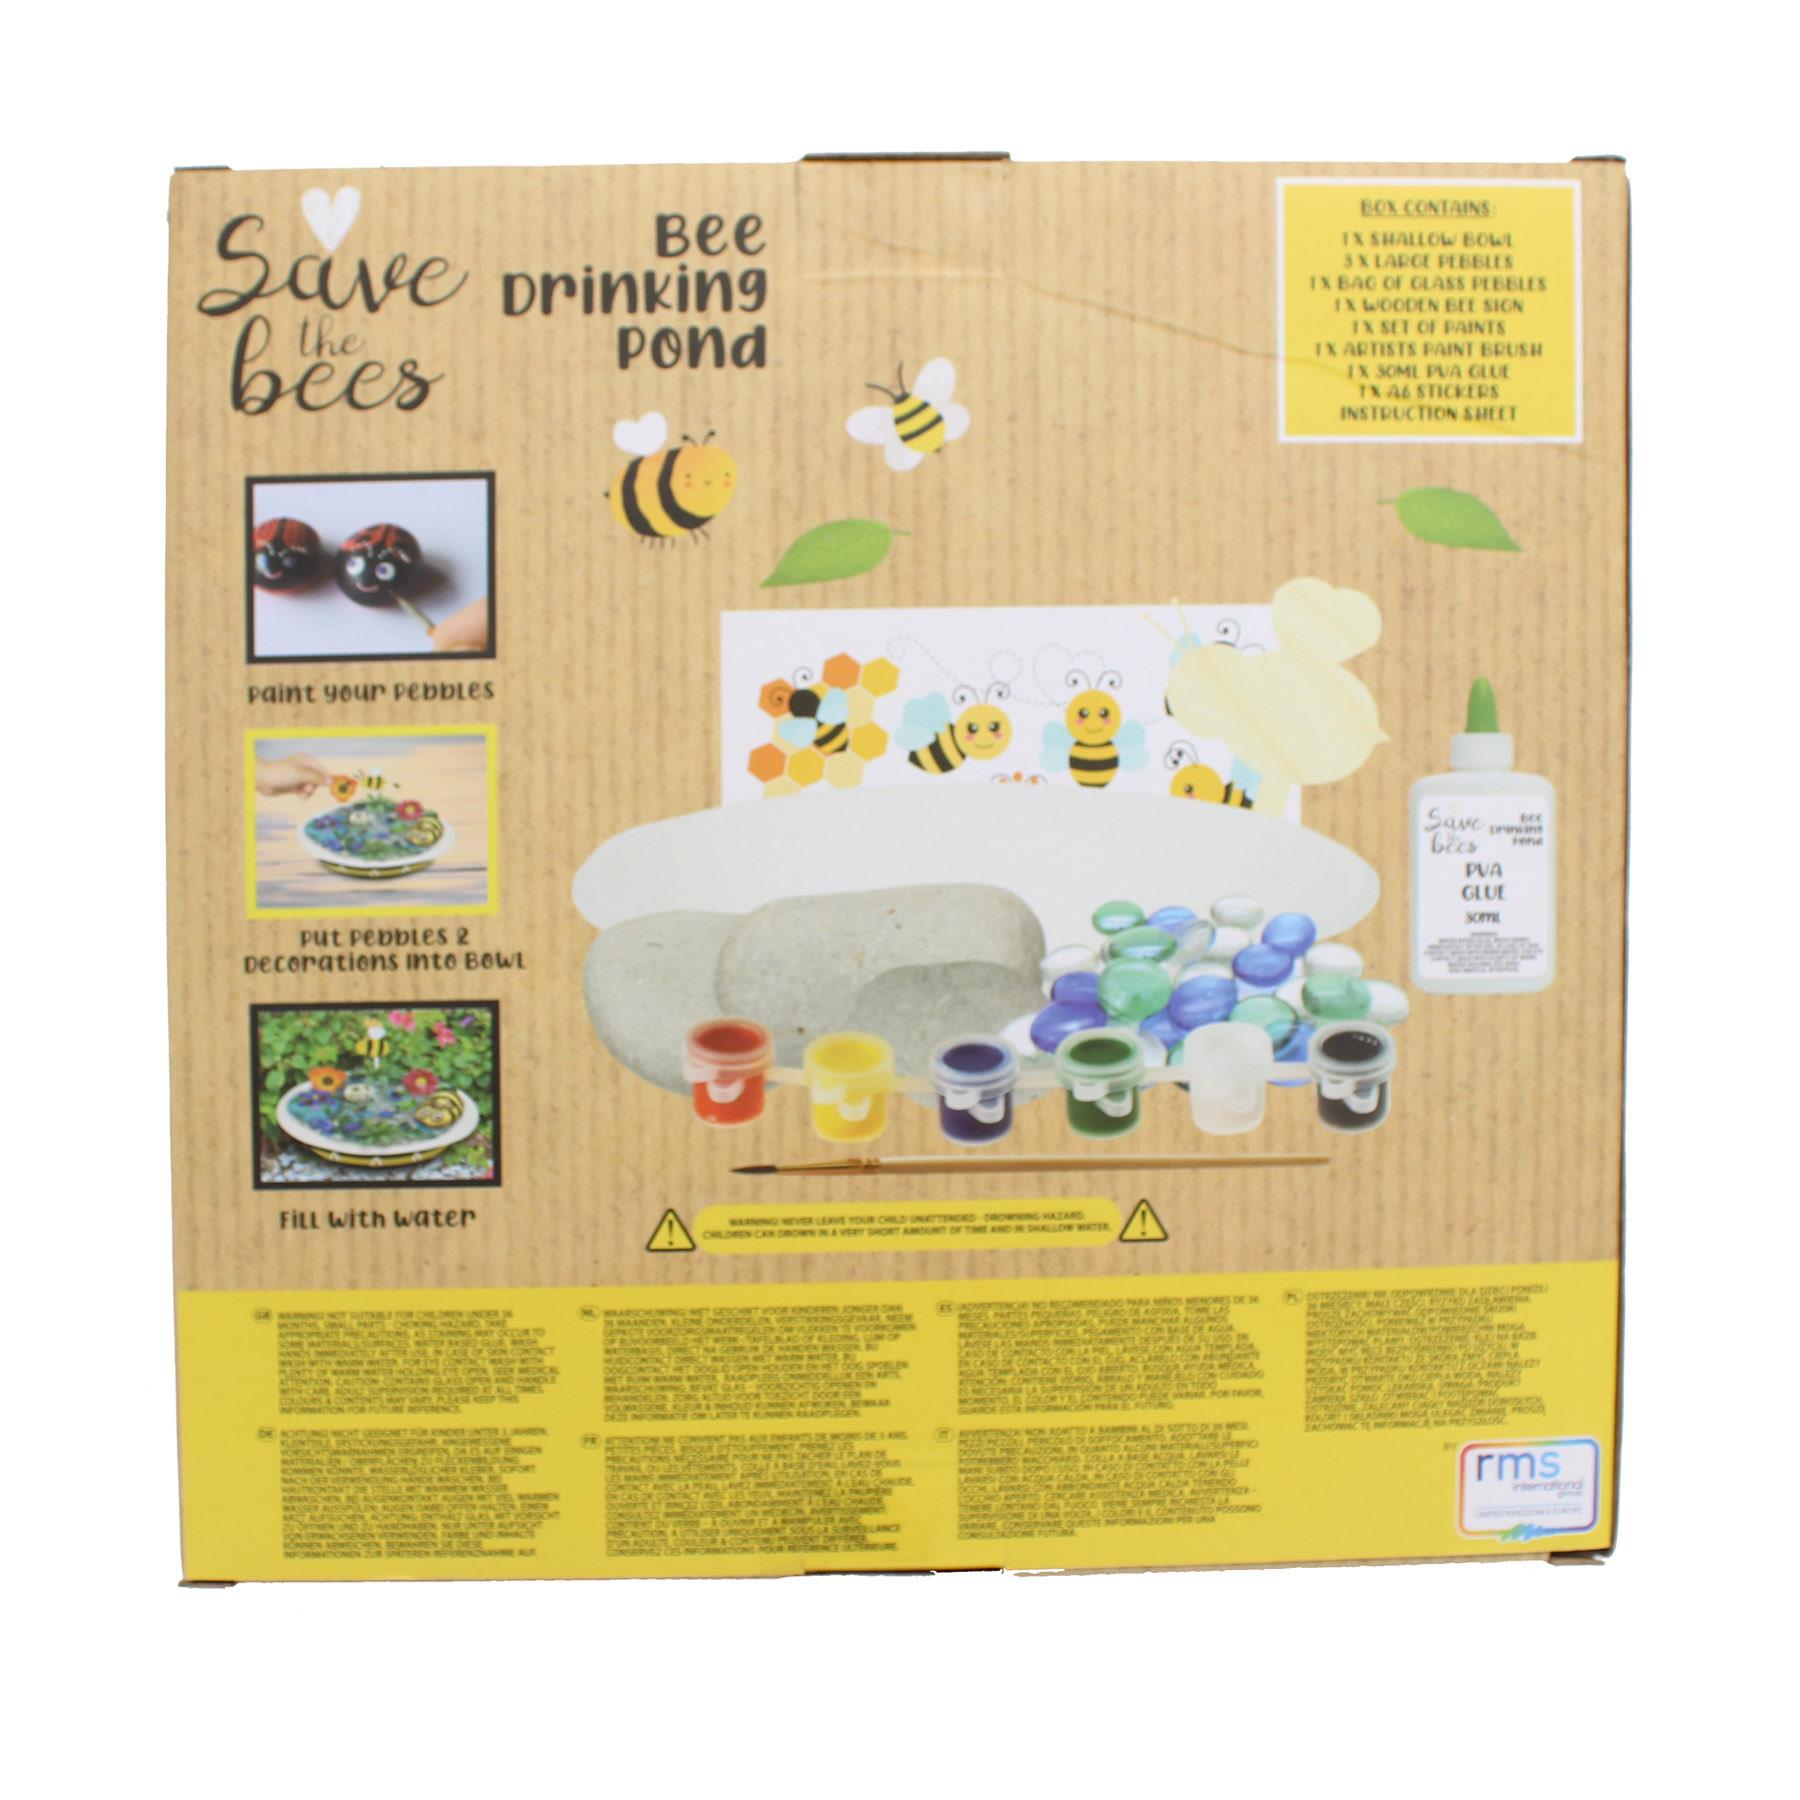 Save The Bees Creative Kit Age 6yrs+ - Bee Drinking Pond